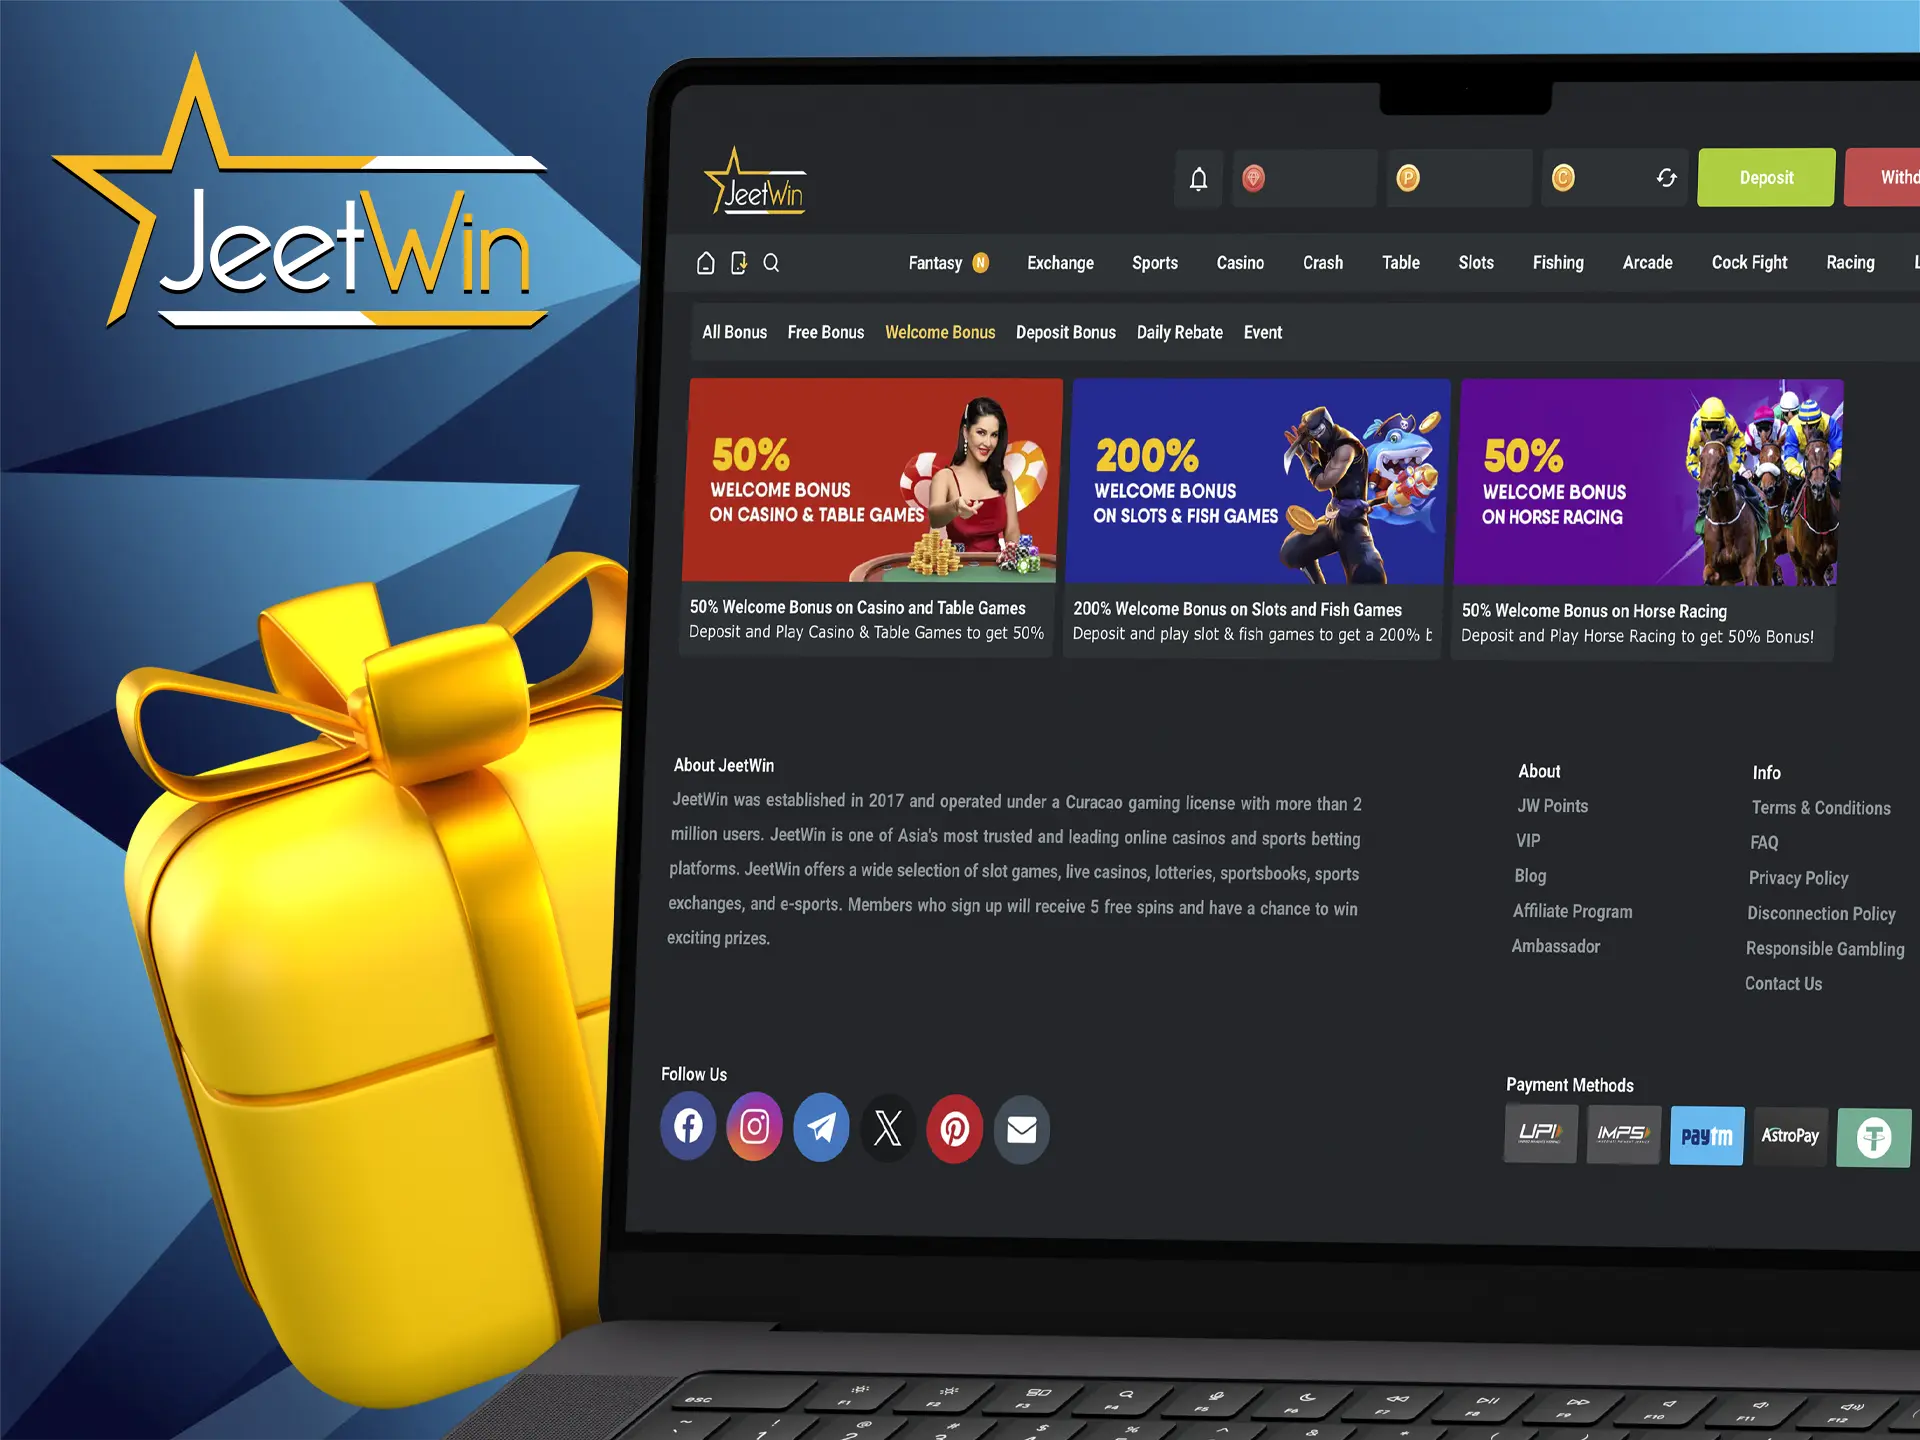 Claim your welcome bonus from Jeetwin to bring your cricket betting to the max.